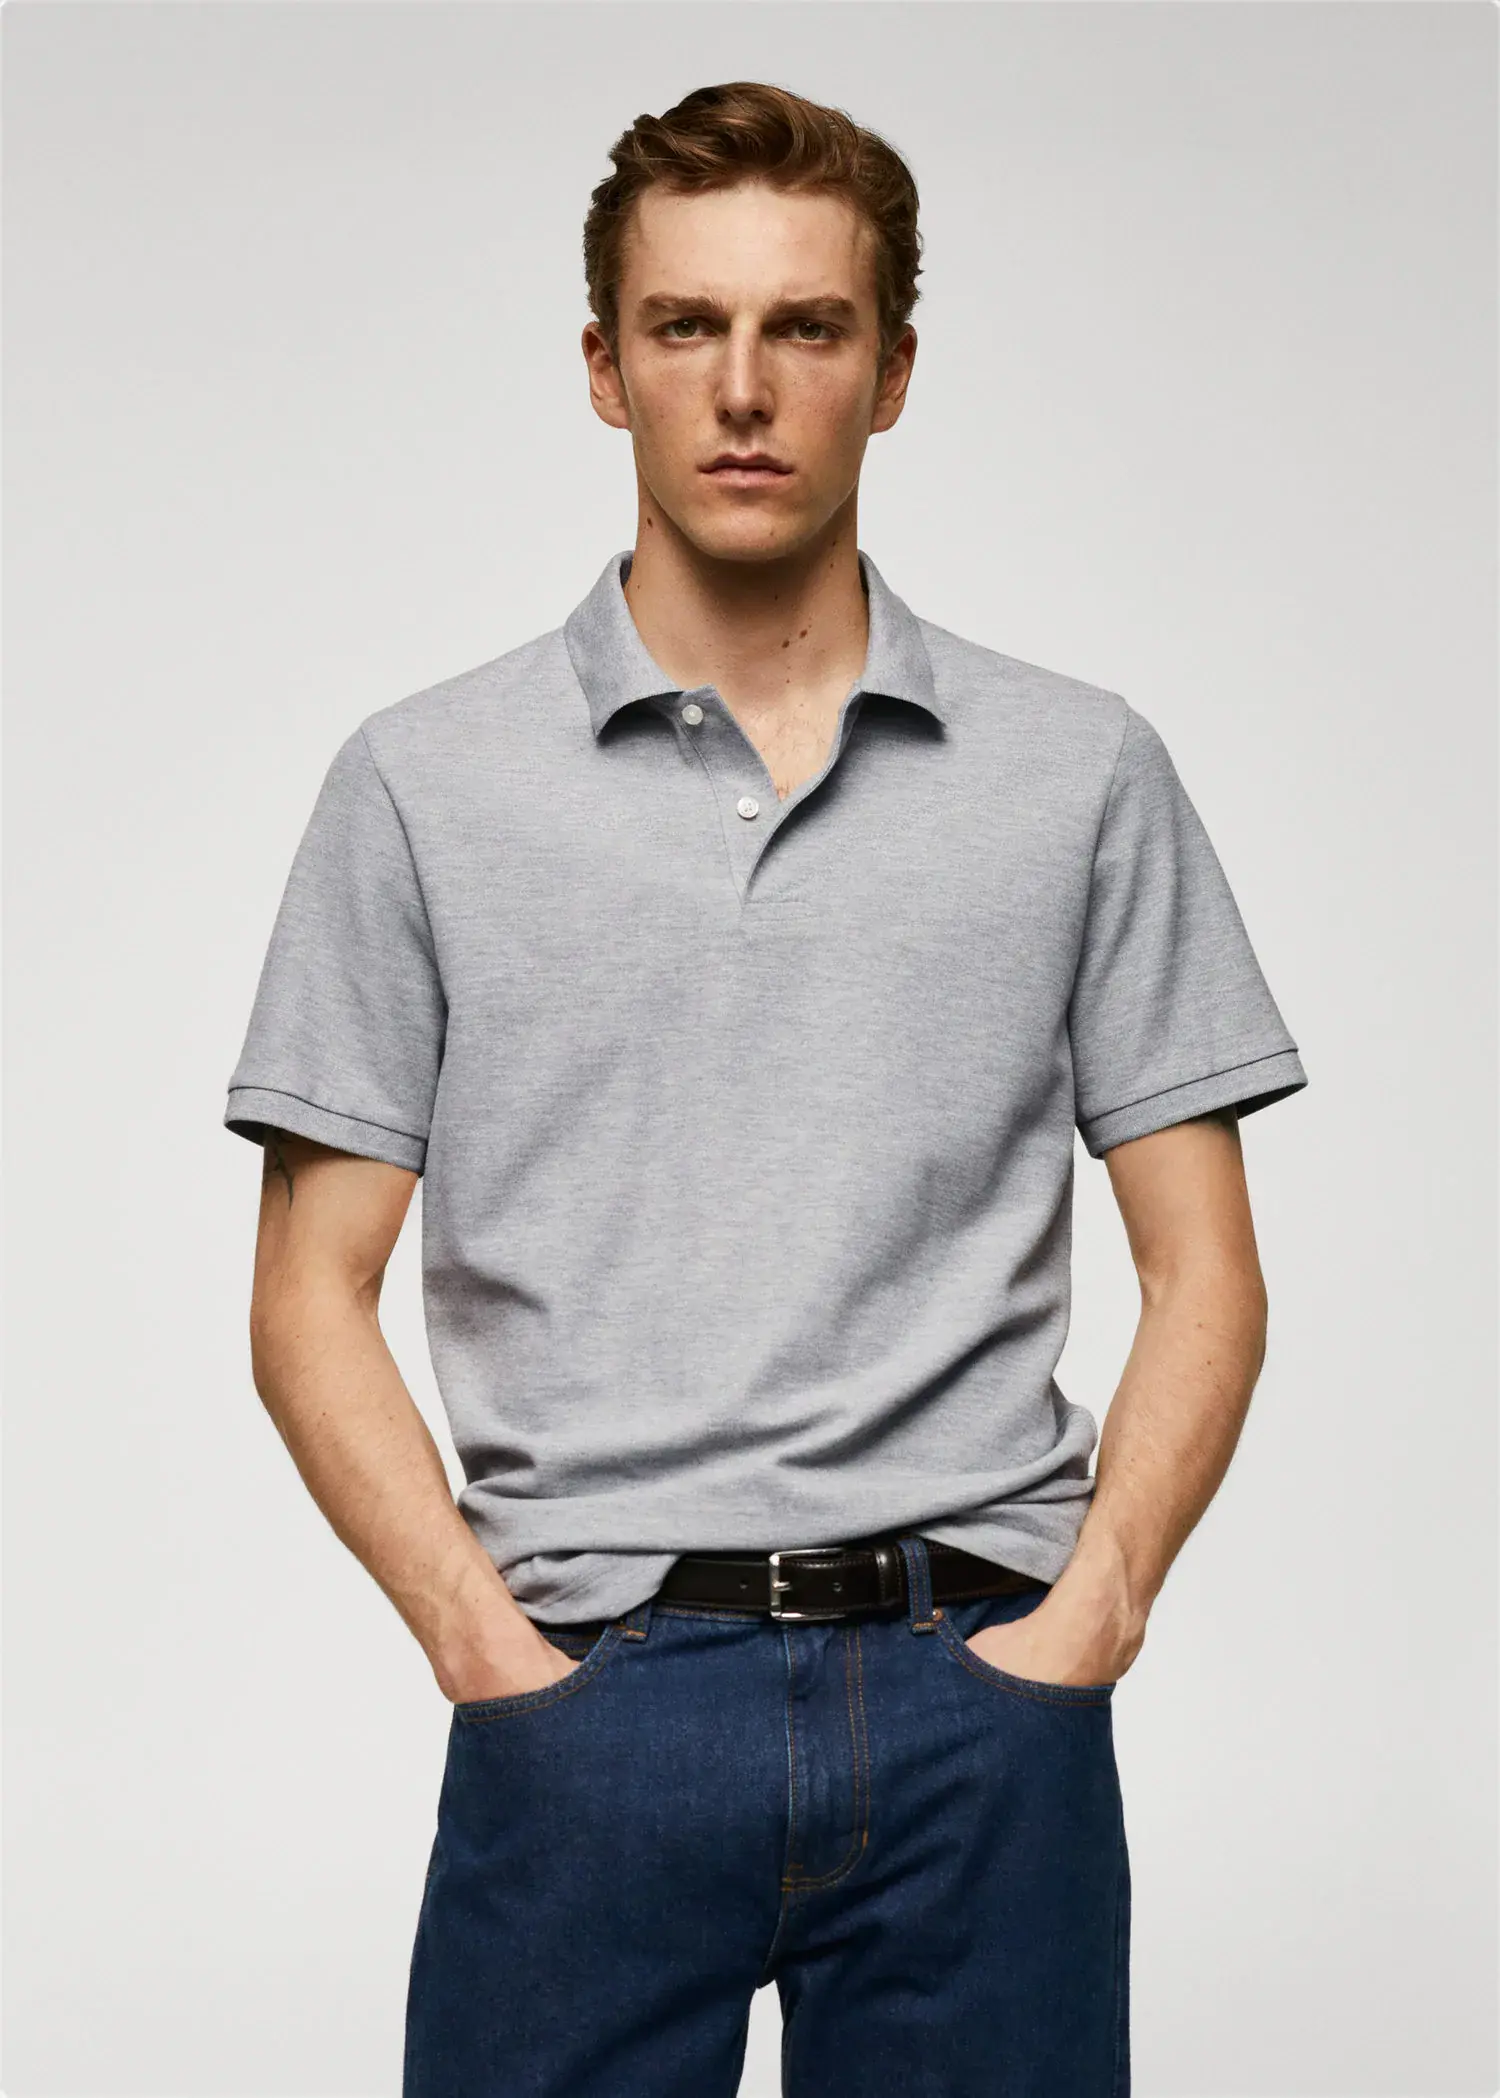 Mango 100% cotton pique polo shirt. a man in a gray polo shirt is standing with his hands in his pockets 